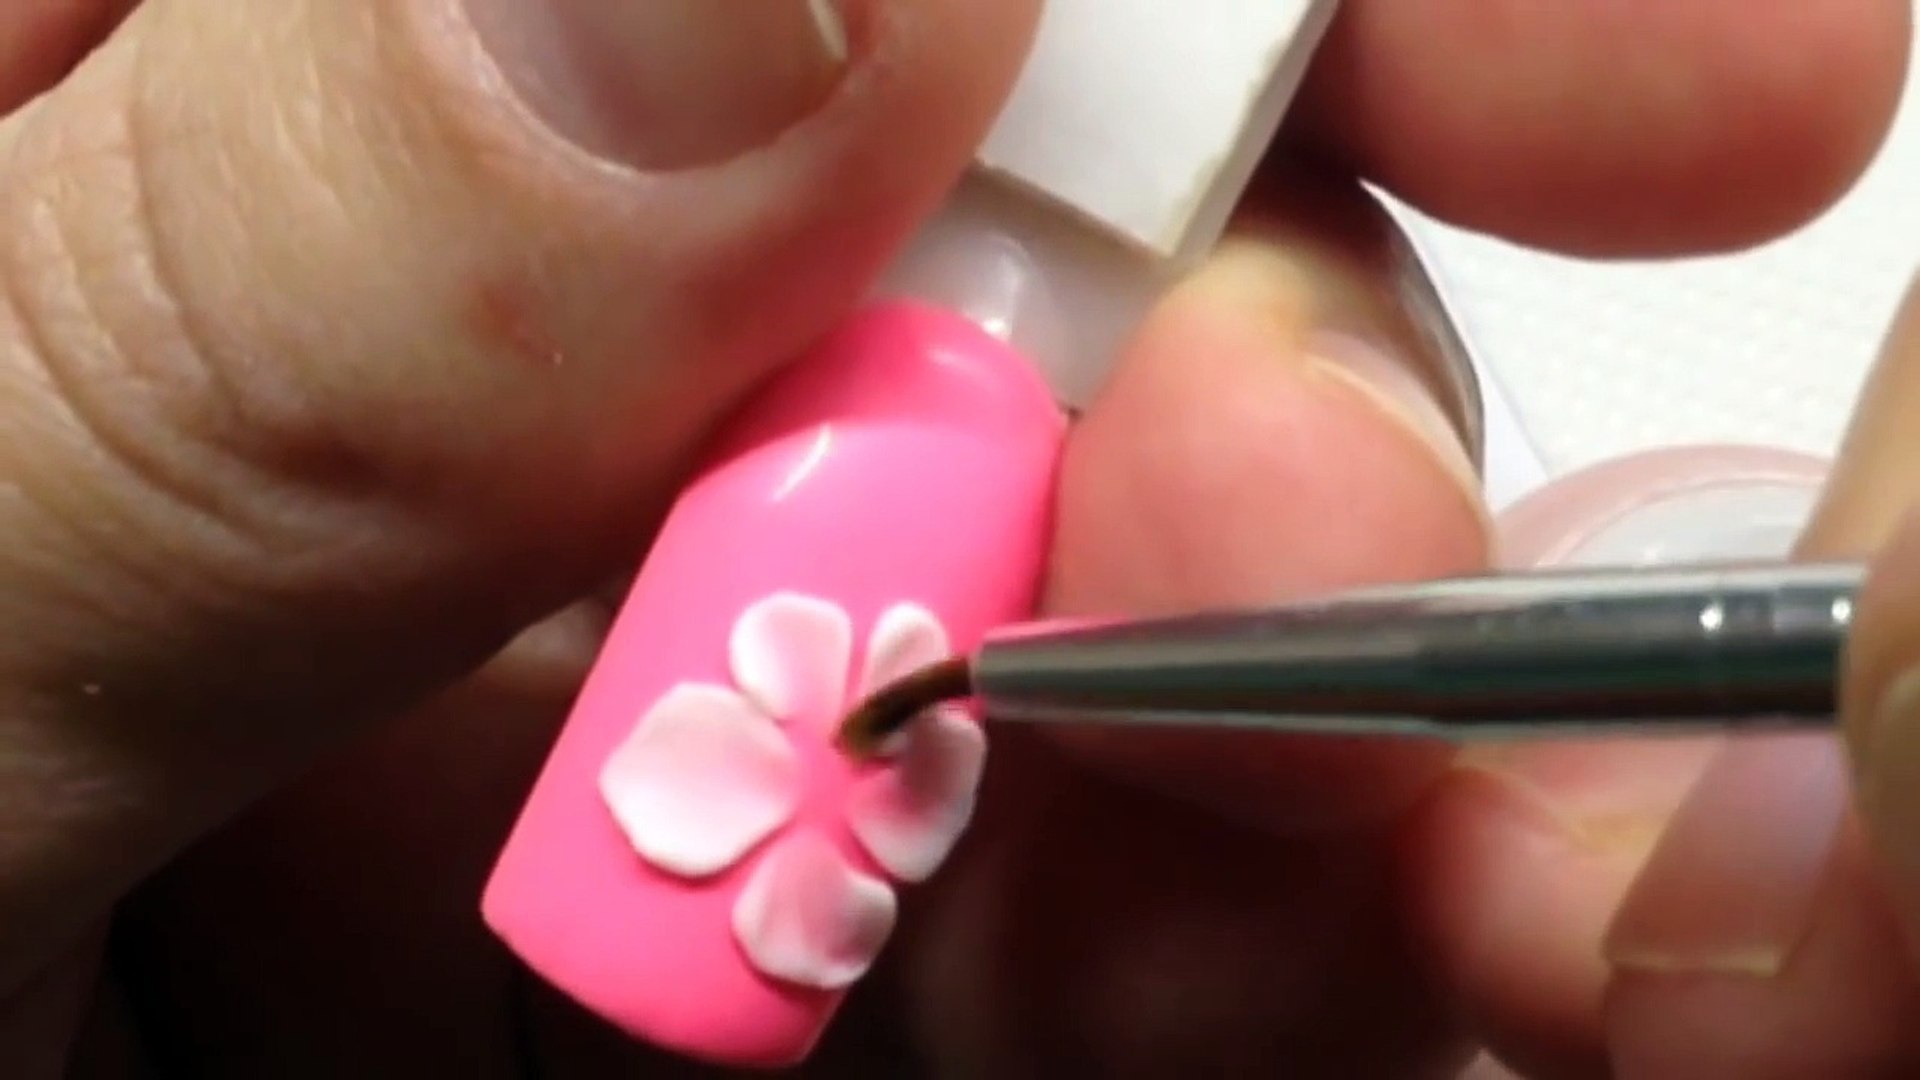 NEW TECHNIQUE: How to Make 3D GEL flowers on Nails! TOP 3D Acrylic  Imitation Nail Flower D - Dailymotion Video